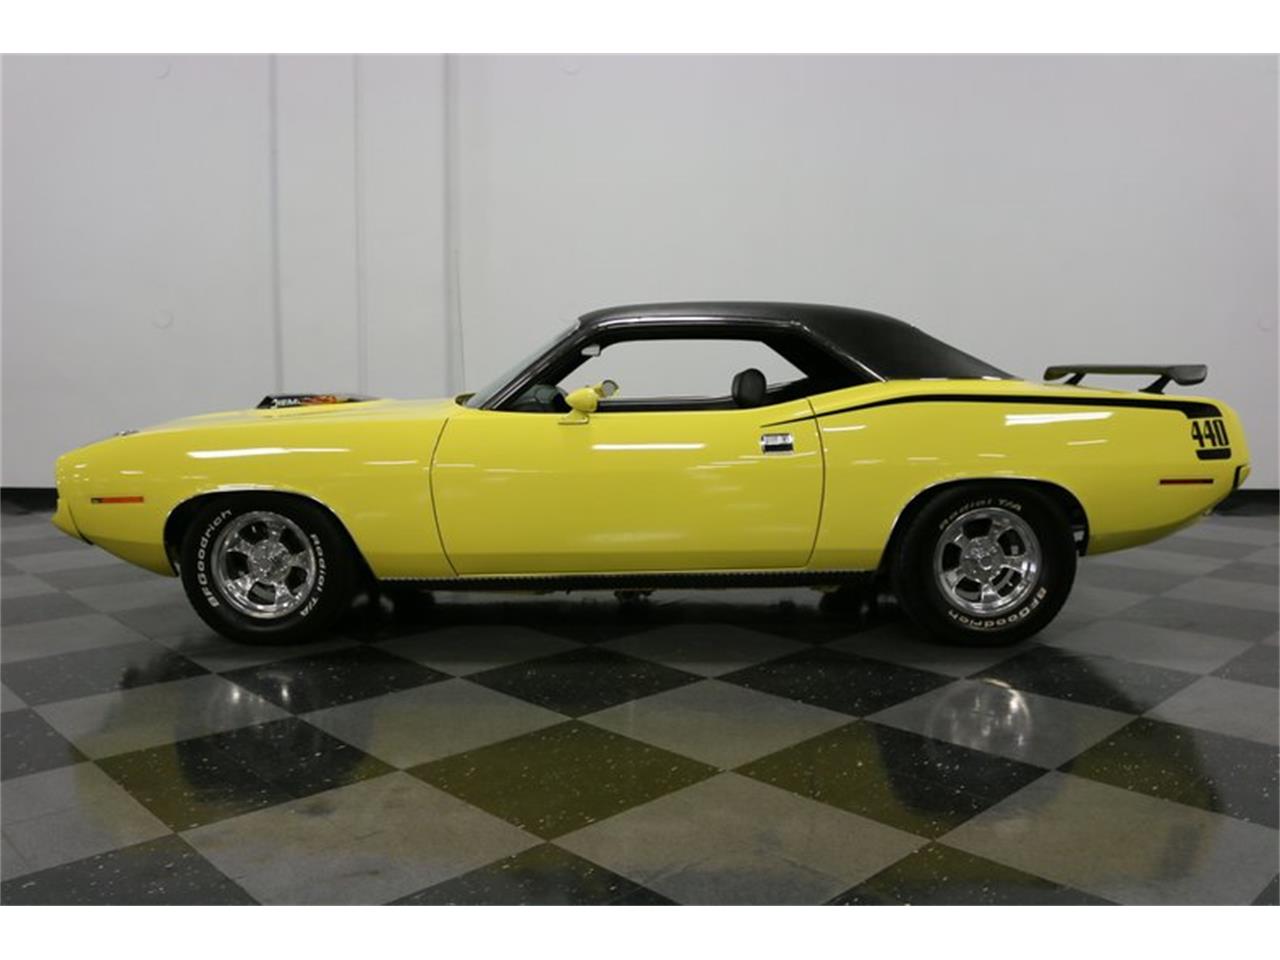 1970 Plymouth Cuda for sale in Fort Worth, TX